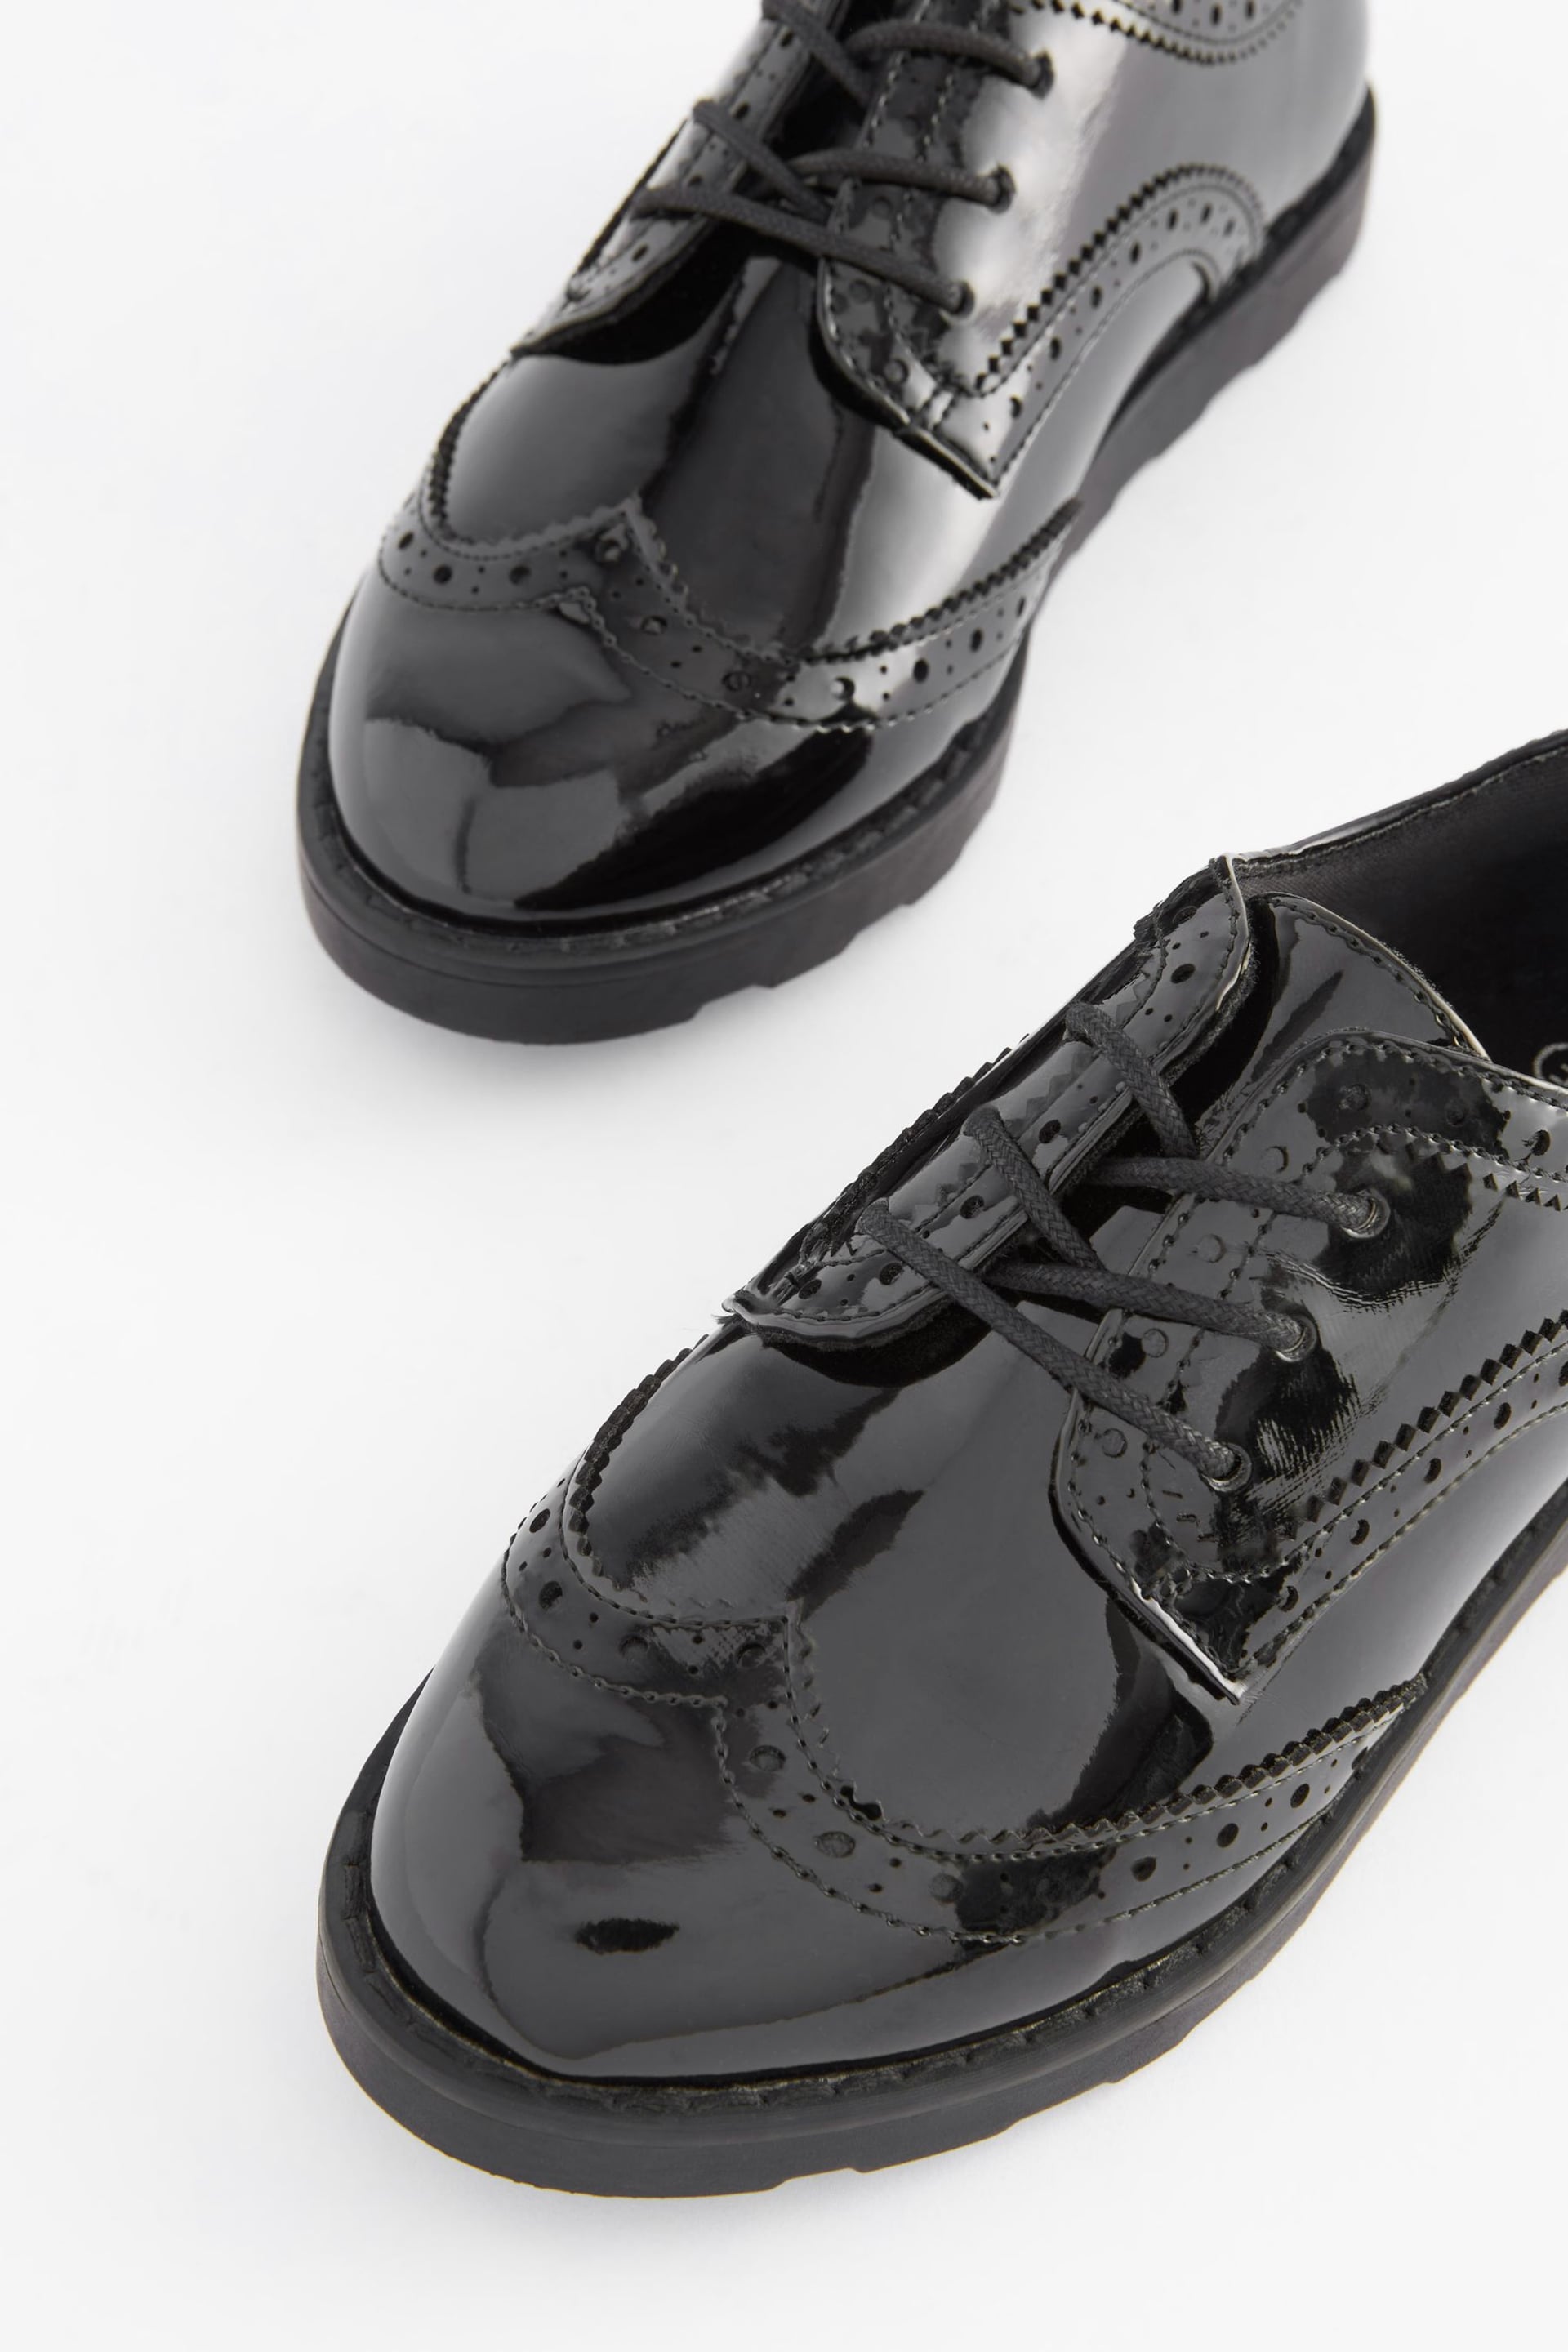 Black Patent Standard Fit (F) School Lace Brogues - Image 3 of 5